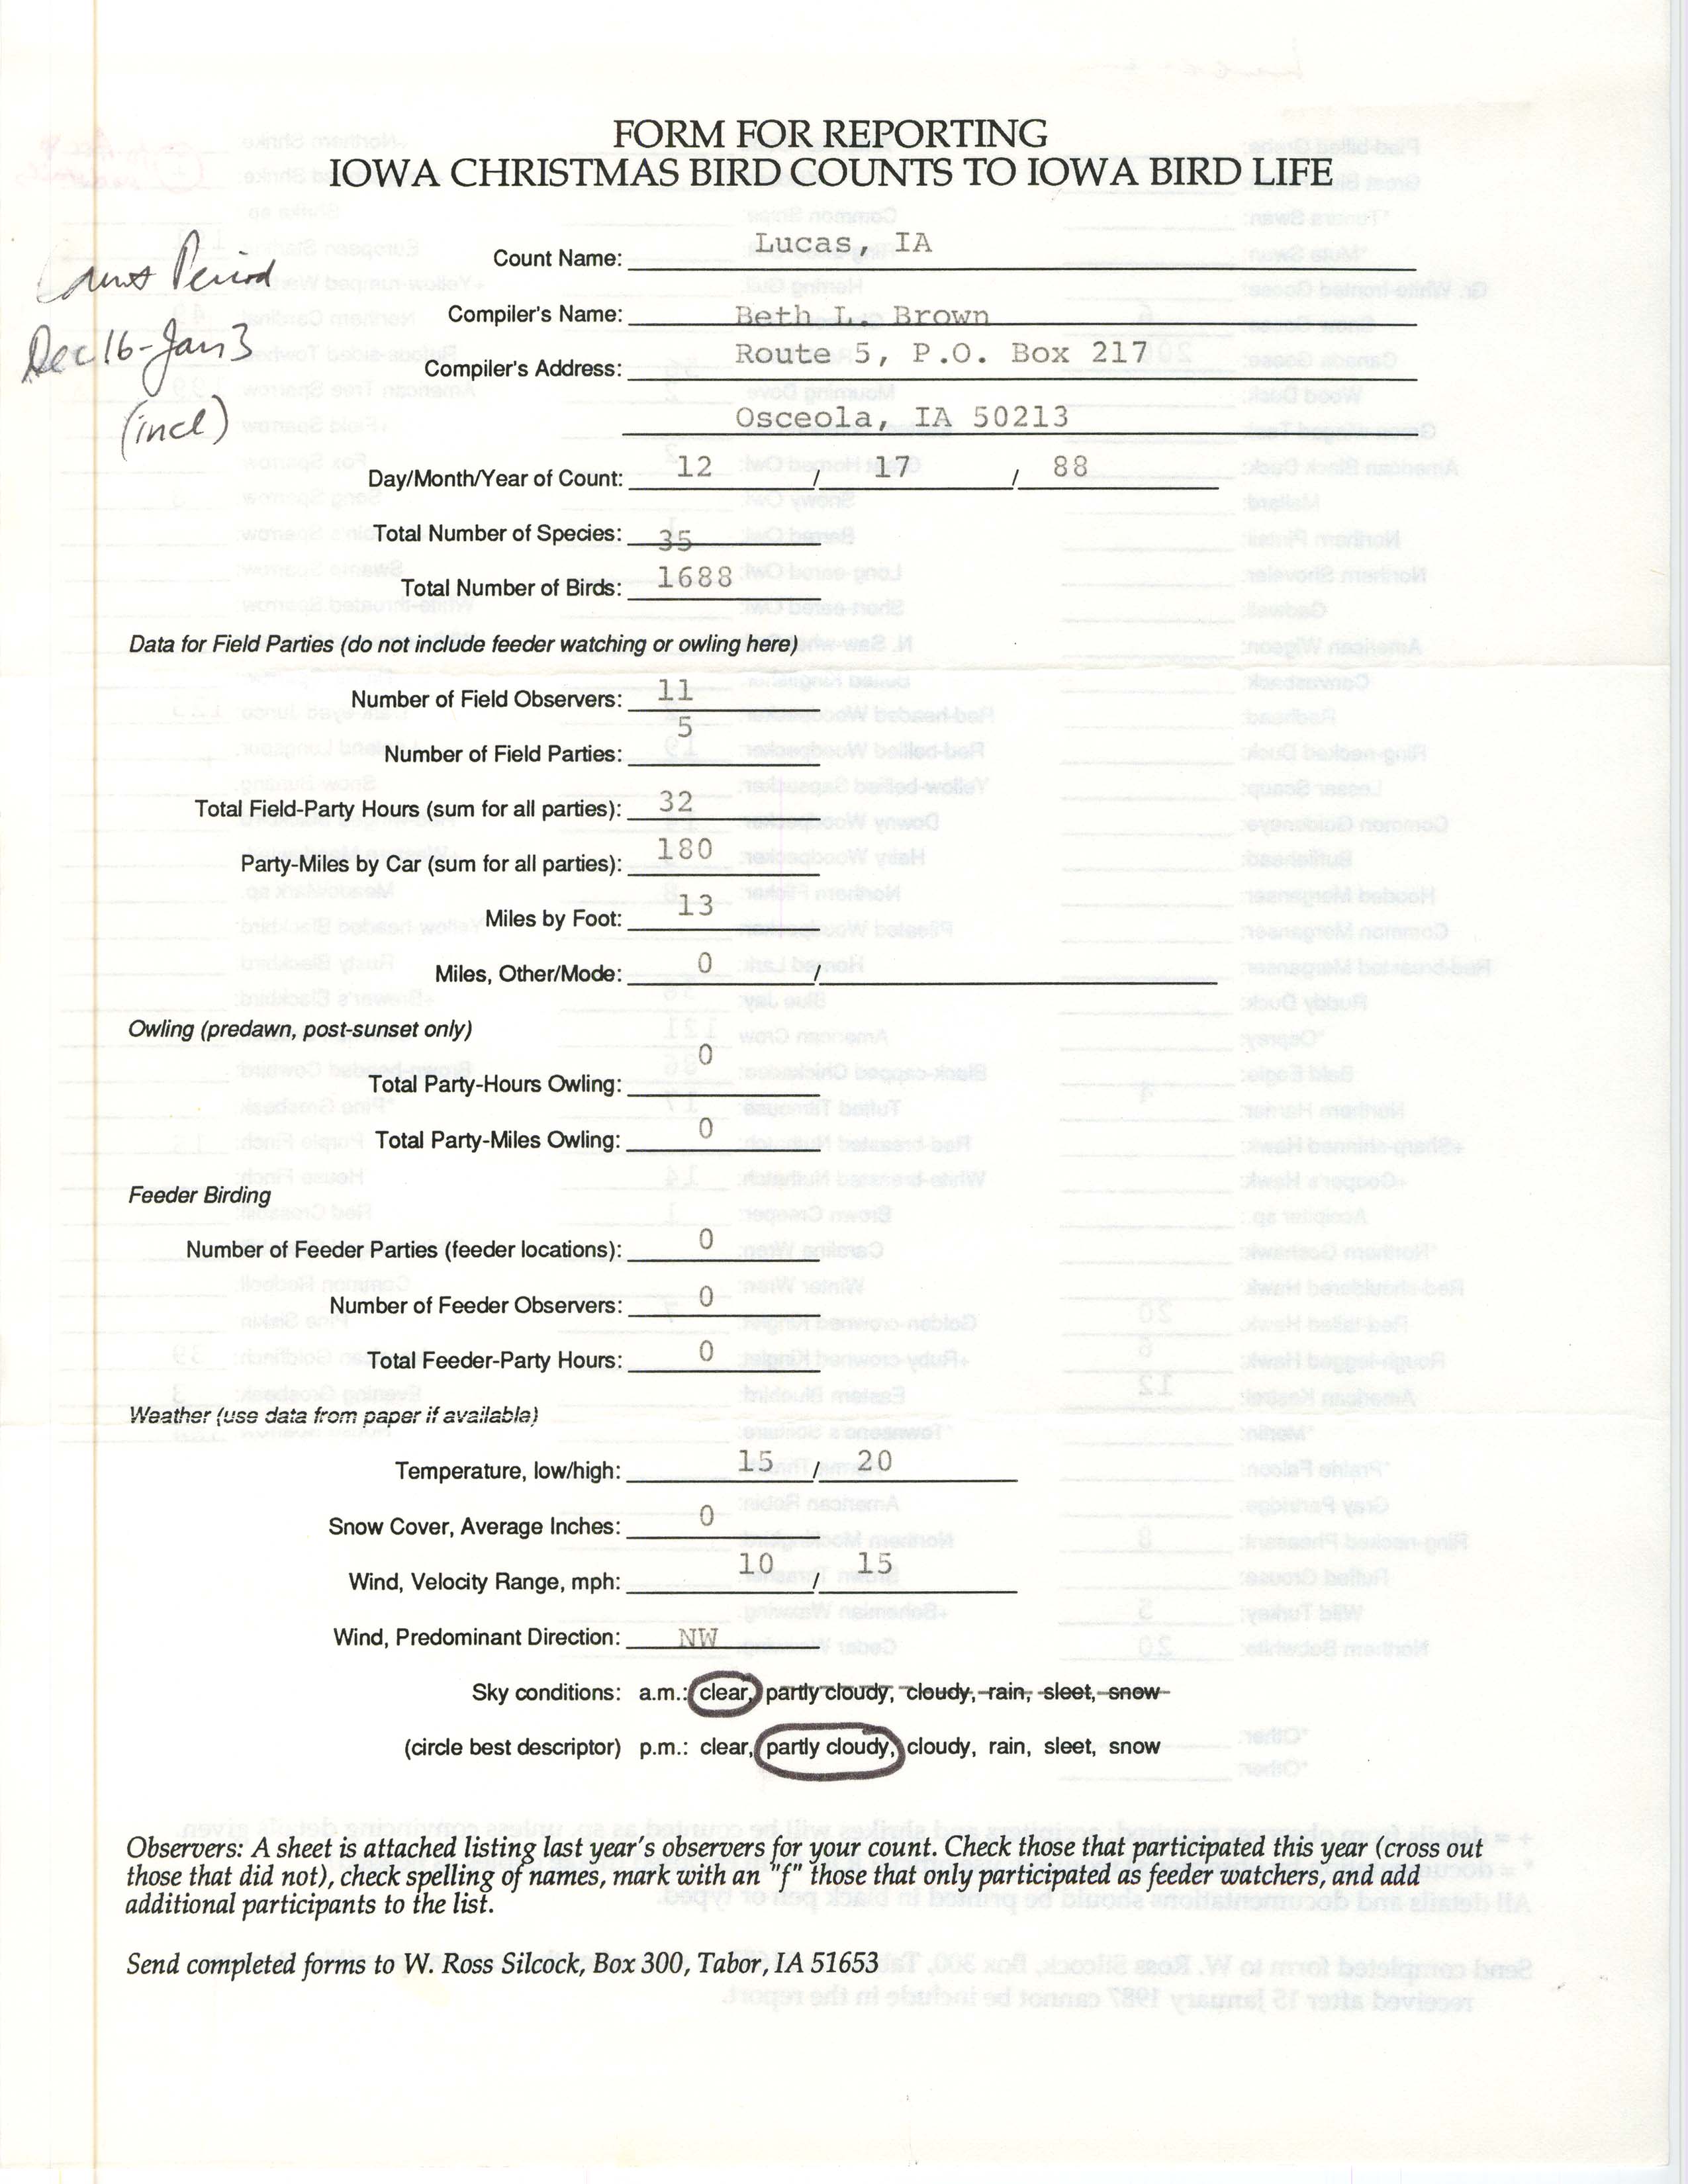 Form for reporting Iowa Christmas bird counts to Iowa Bird Life, Beth Brown, December 17, 1988